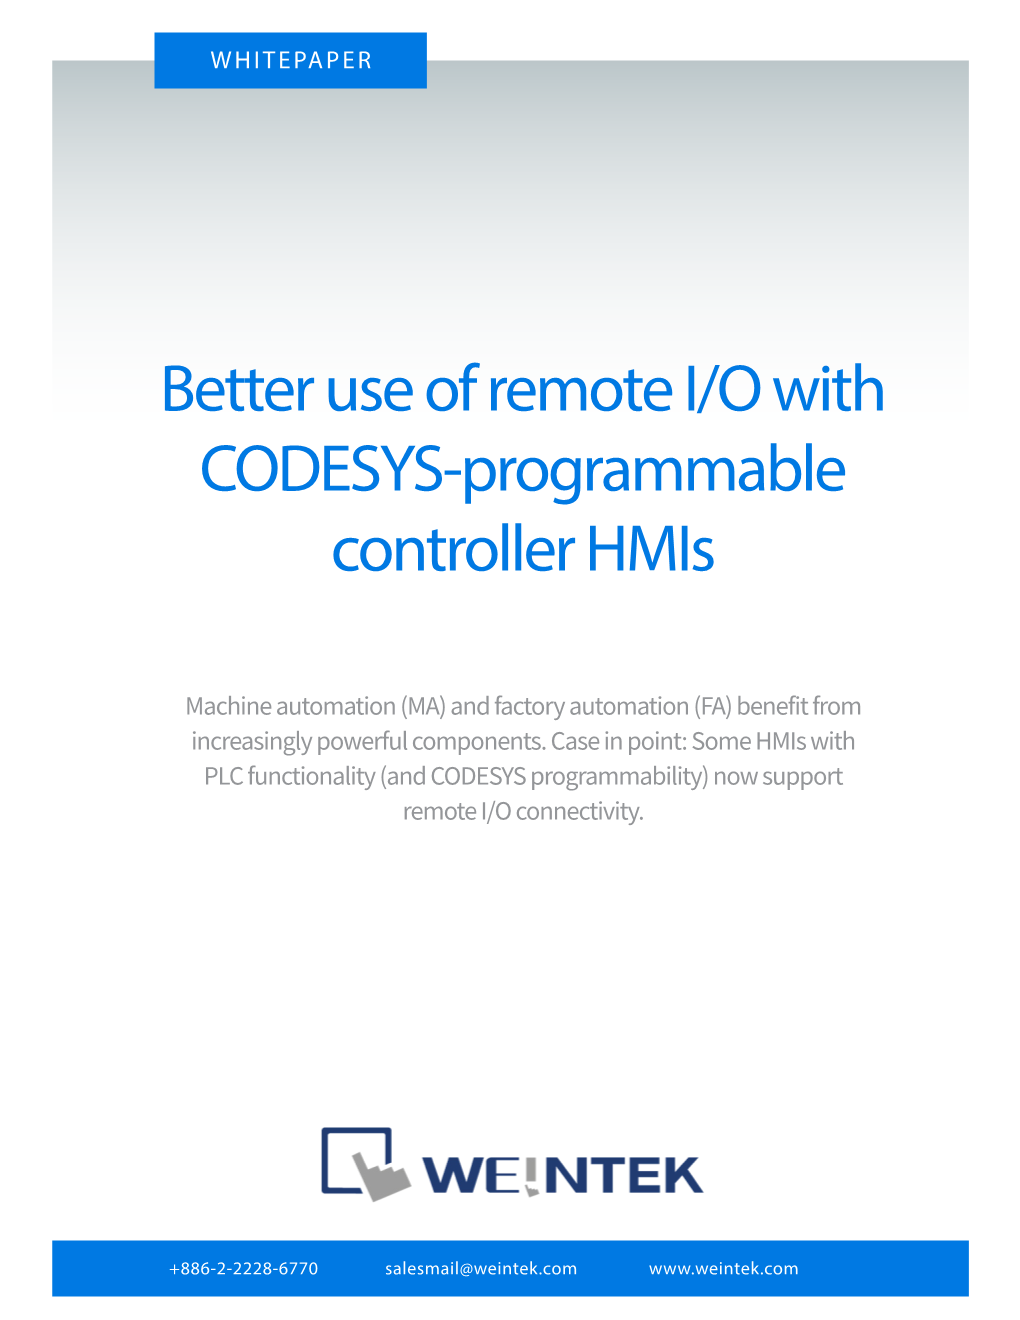 Better Use of Remote I/O with CODESYS-Programmable Controller Hmis